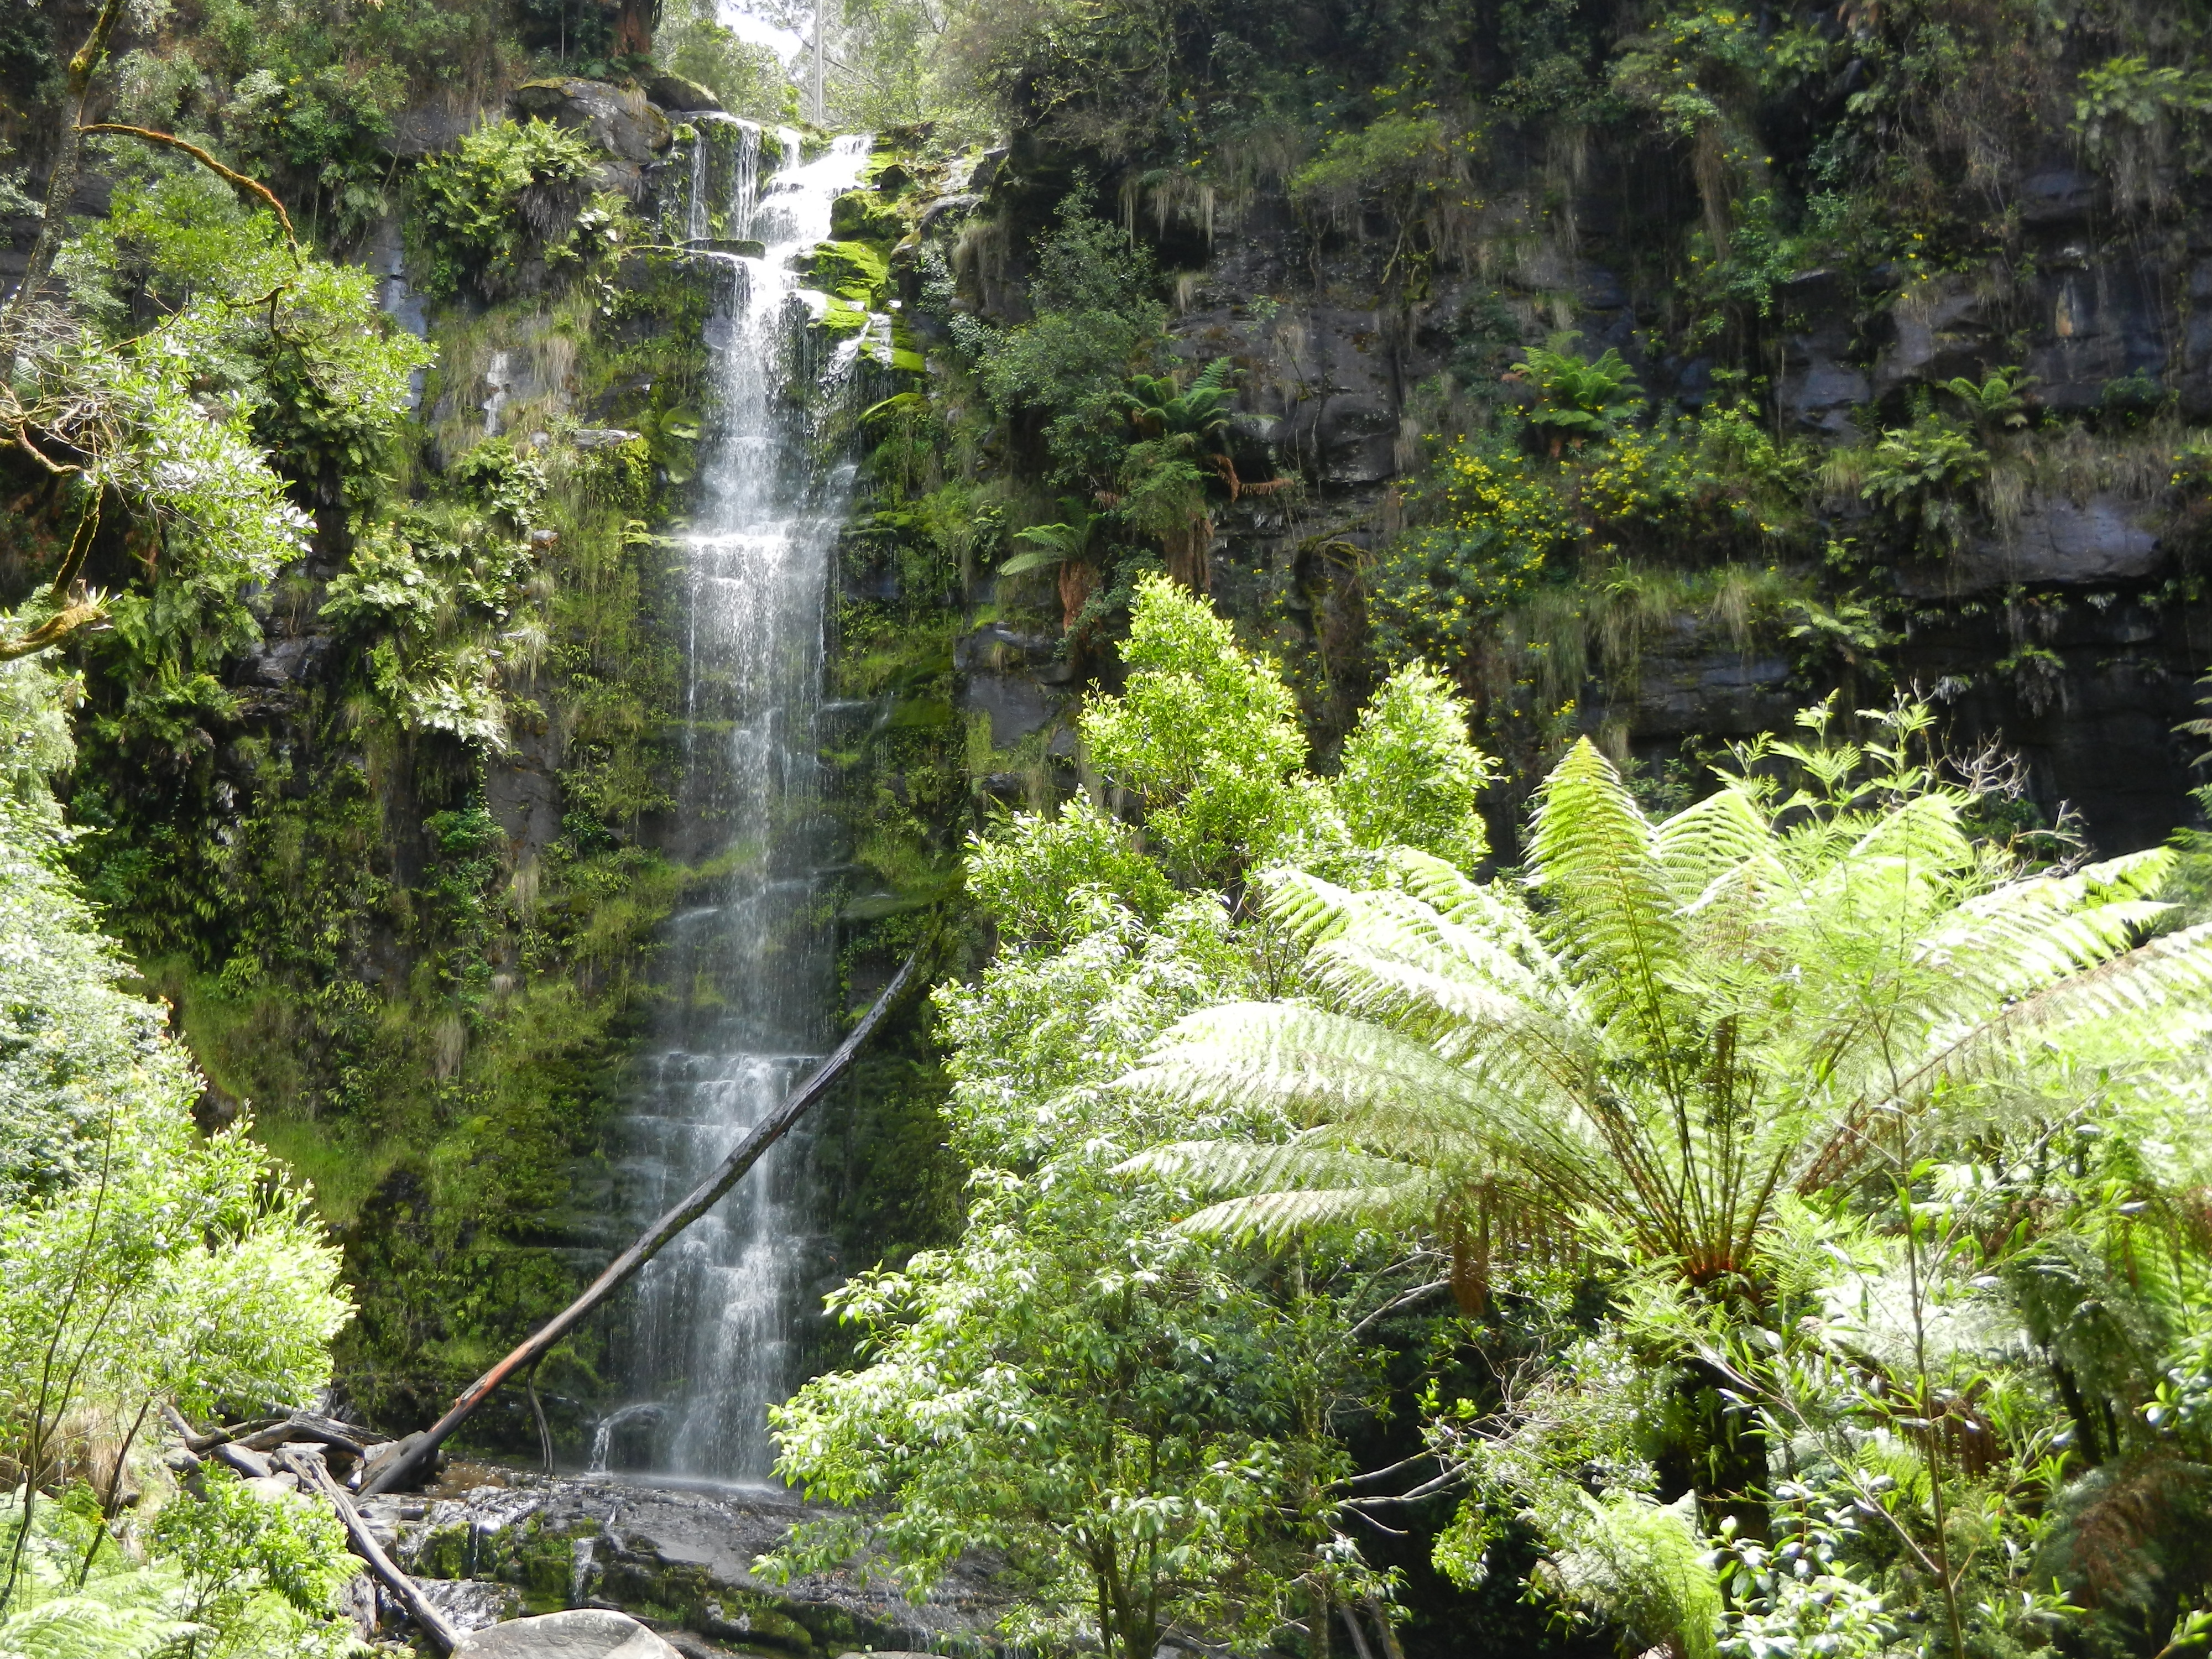 Green shrubs in the foreground with a cliffside waterfall surrounded by greenery in the background.